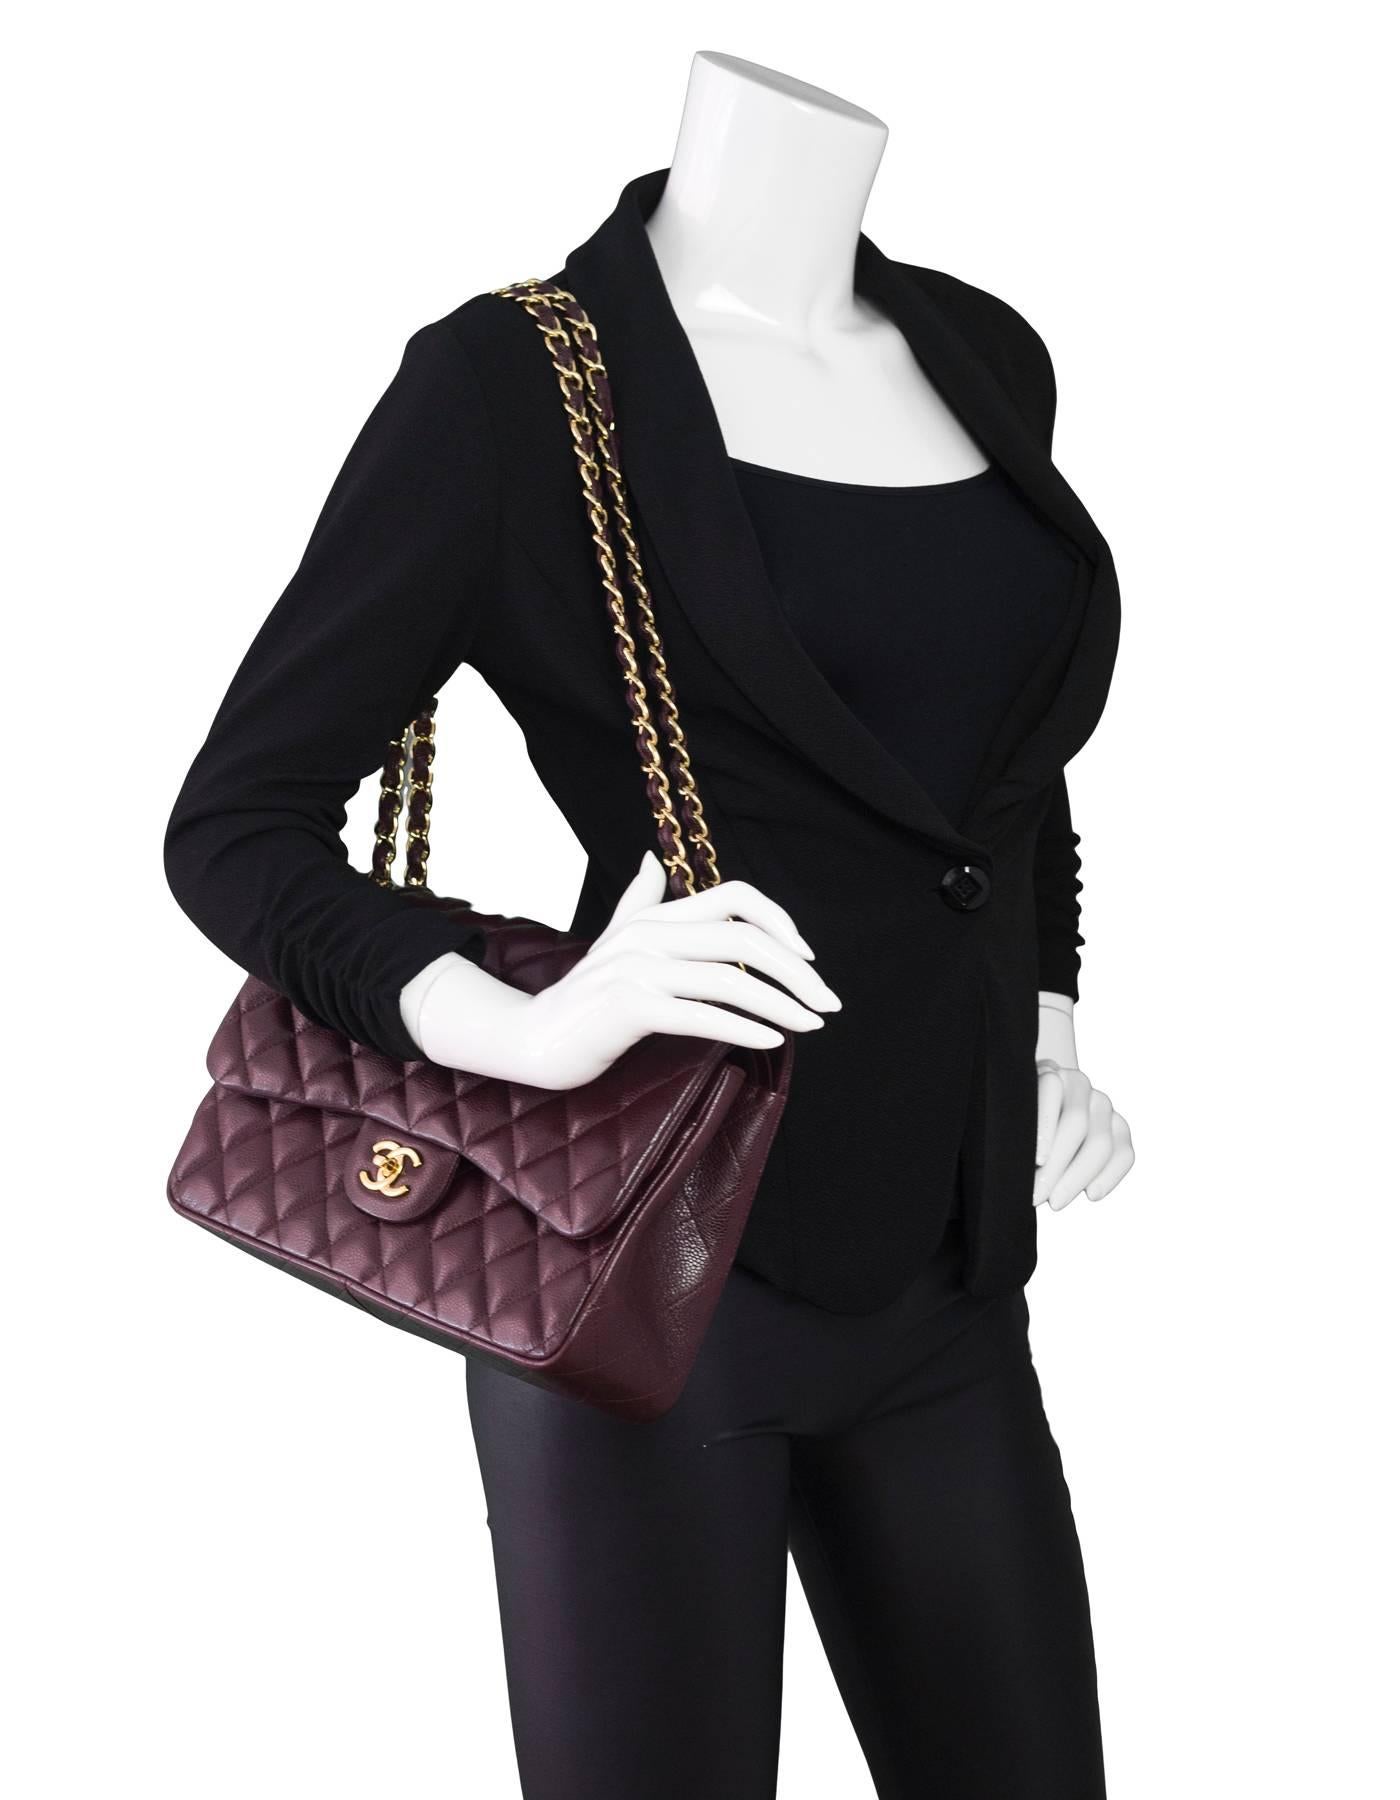 Chanel Eggplant Quilted Caviar Jumbo Double Flap Bag 

Made In: Italy
Year of Production: 2012
Color:  Rich burgundy/eggplant
Hardware: Goldtone
Materials: Caviar leather, metal
Lining: Leather
Closure/opening: Flap top with CC twist lock
Exterior